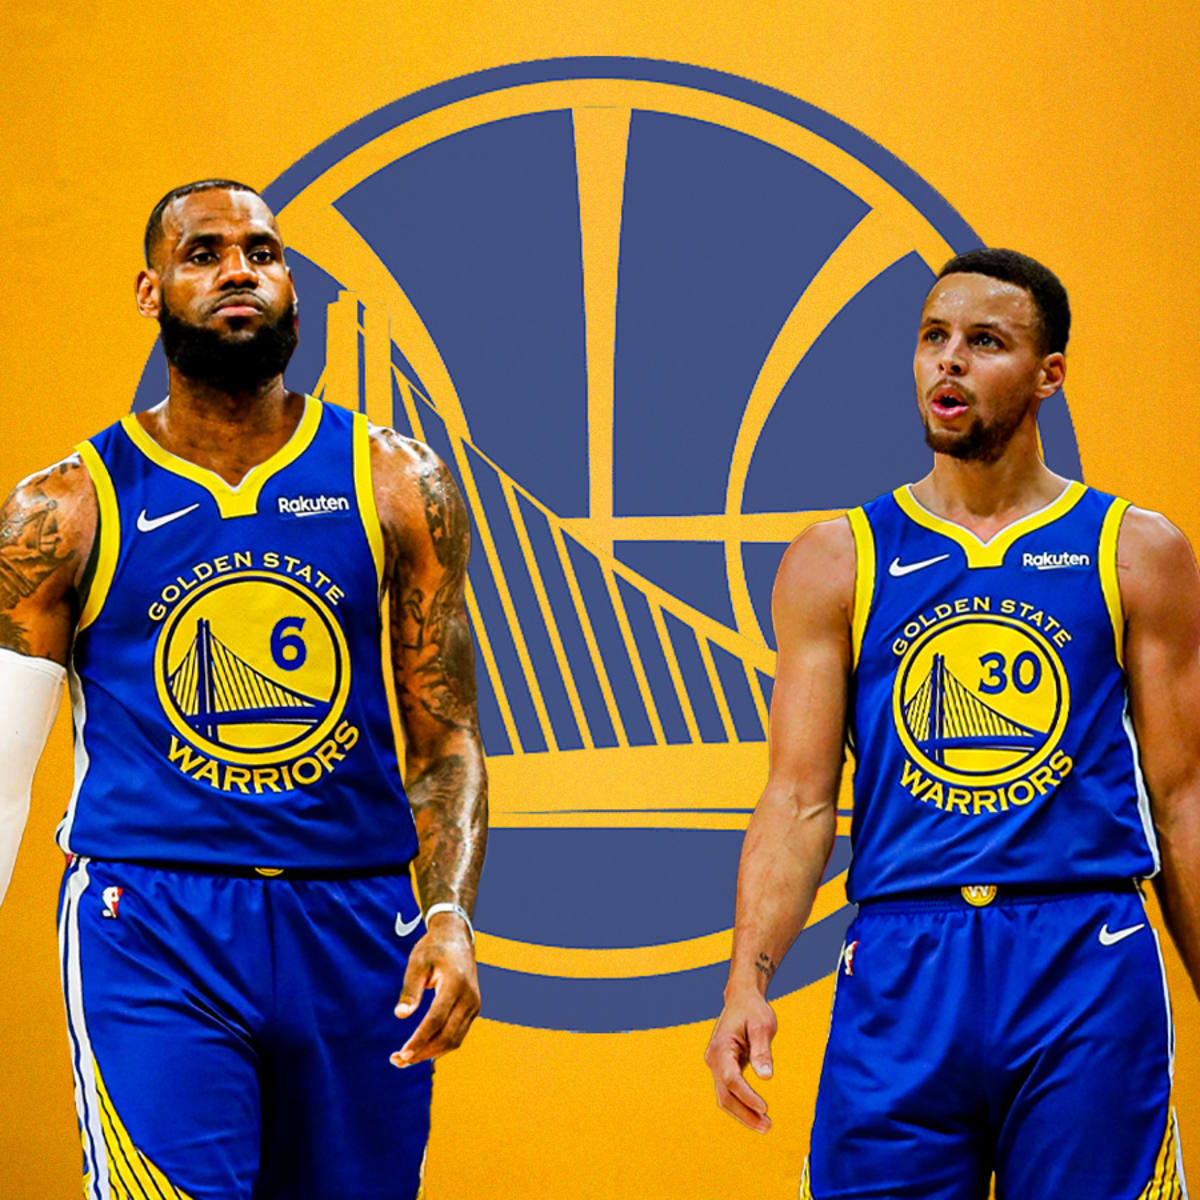 Will LeBron James & Stephen Curry Play Tonight? Lakers vs Warriors